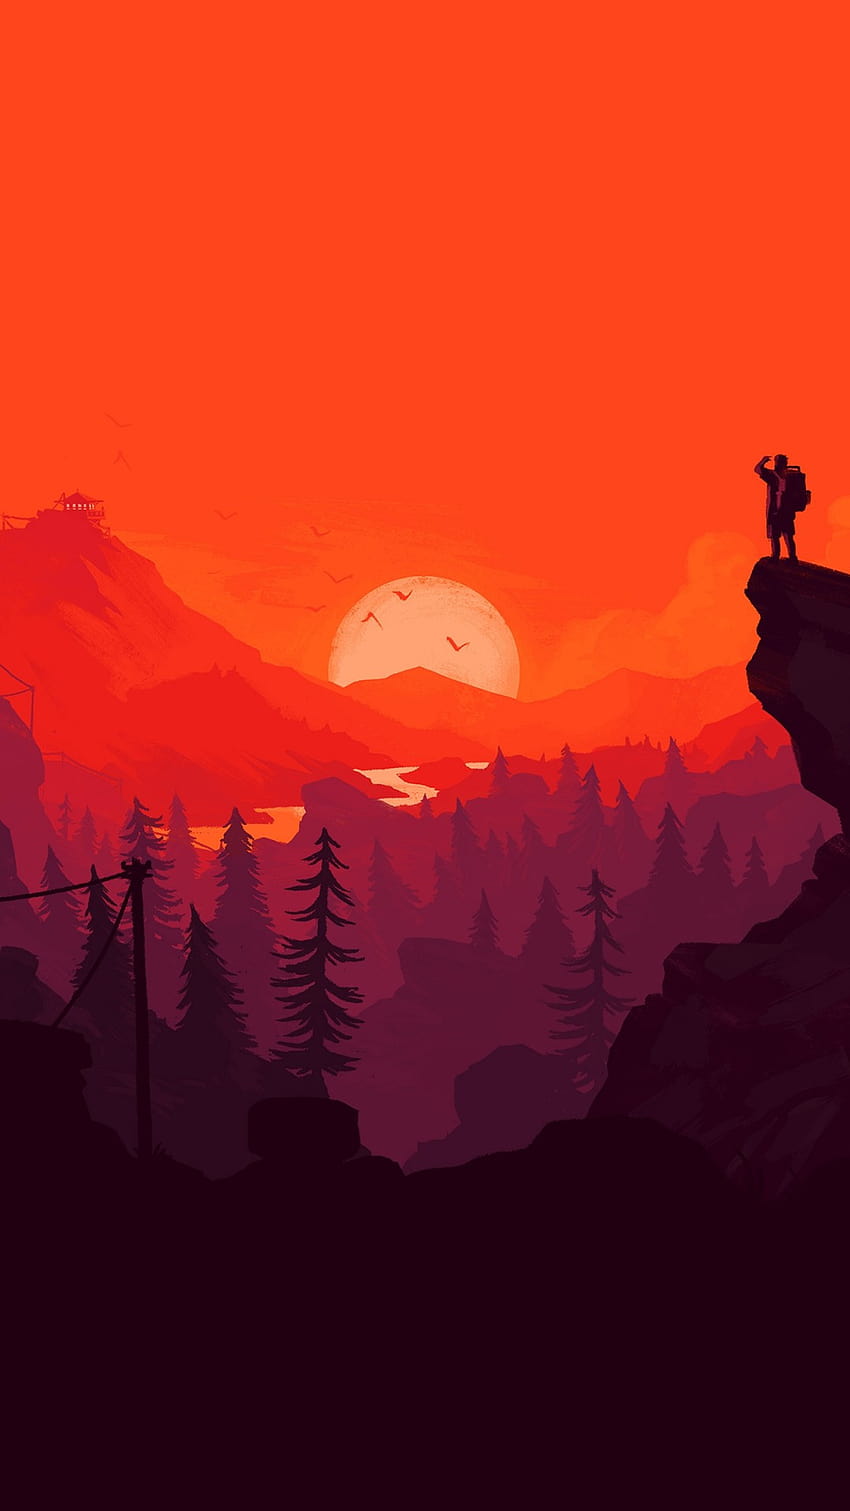 1080x1920 Flat Landscape, Illustration, Sunset, Cliff, Man Hiking, Red Sky, Digital Art for iPhone 8, iPhone 7 Plus, iPhone 6+, Sony Xperia Z, HTC One, flat art iphone HD phone wallpaper